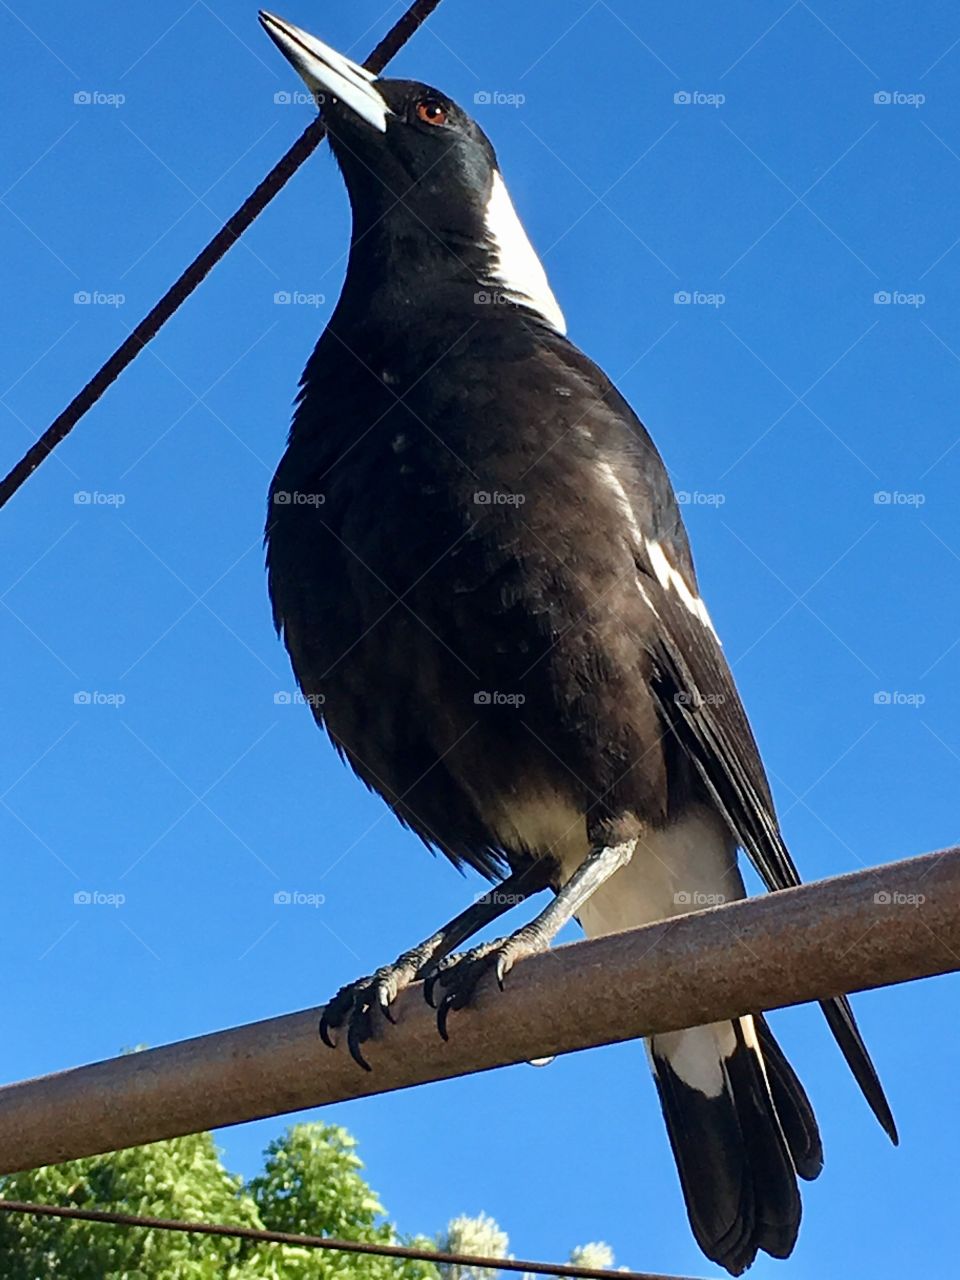 Black and white coloured magpie perched on a metal
Pole warbling, perched high against a vivid blue sky